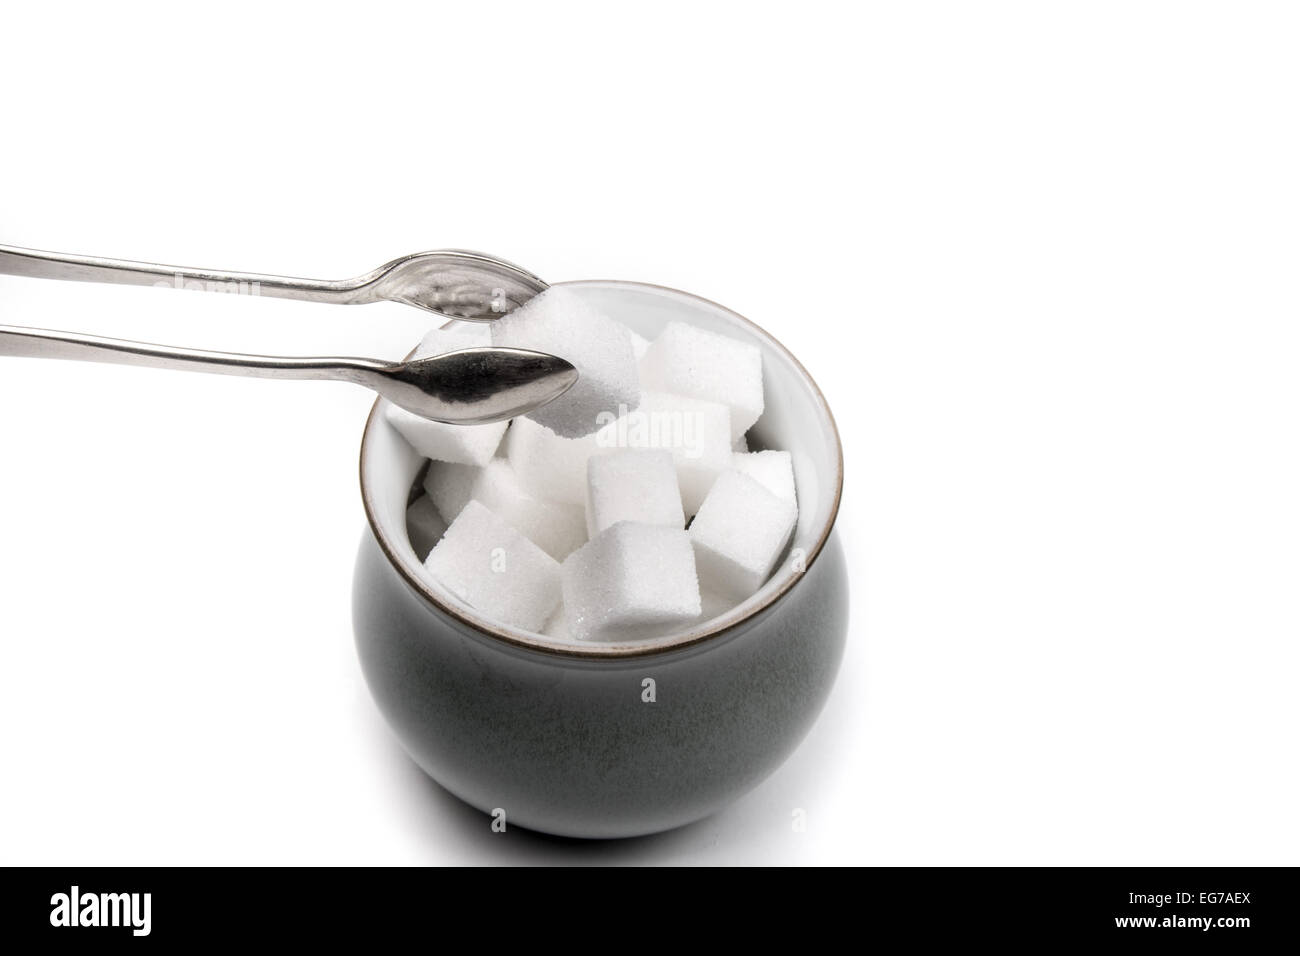 White Sugar Cubes in A Sugar Bowl With One Being Removed By A Pair of  Silver Tongs Stock Photo - Alamy